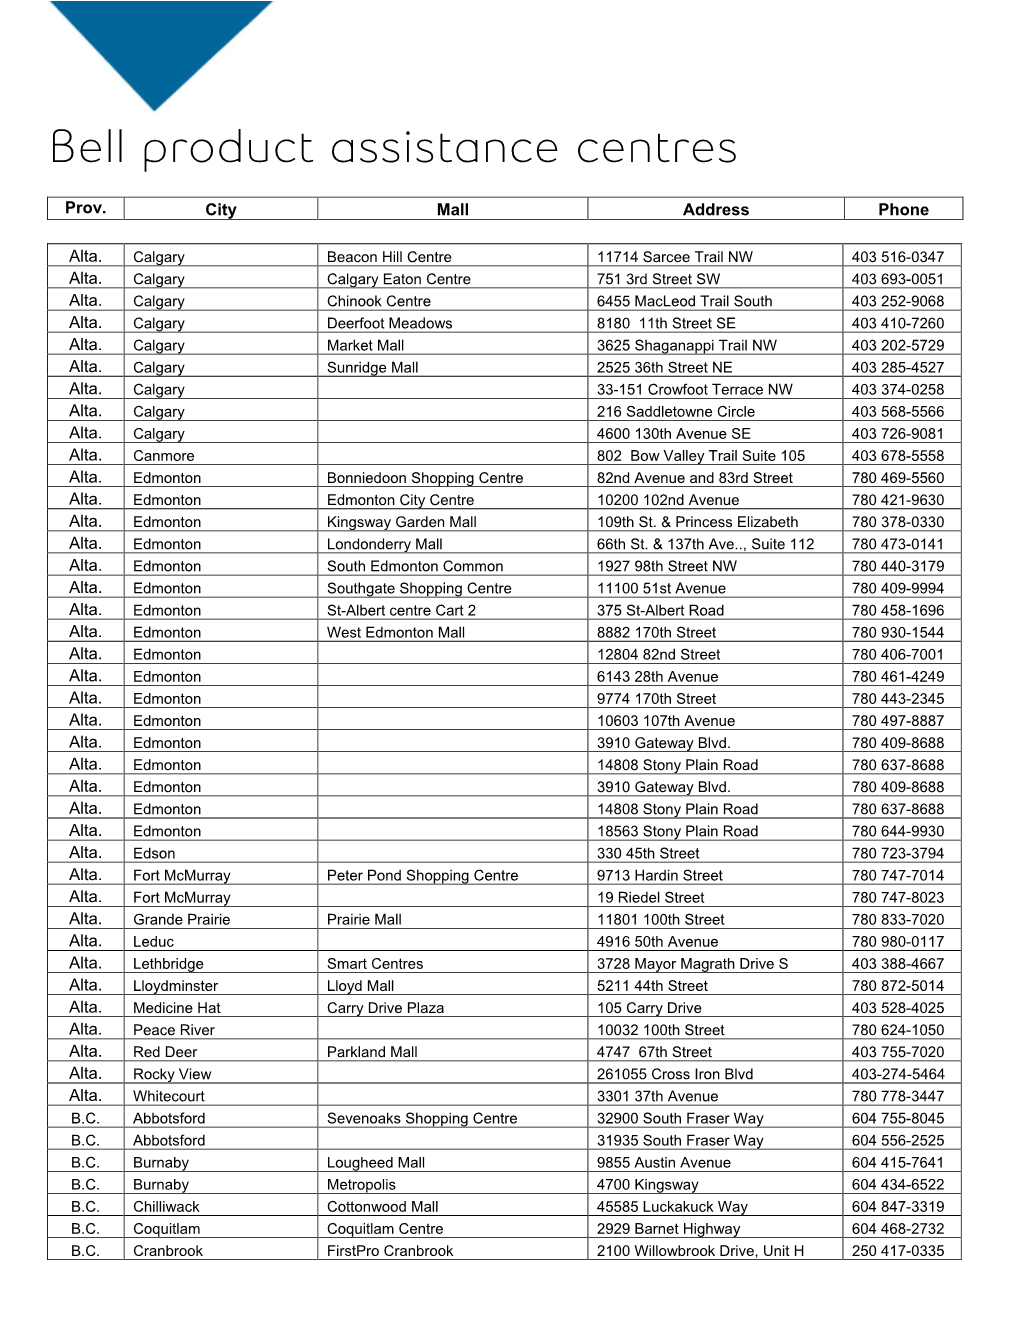 Bell Product Assistance Centres